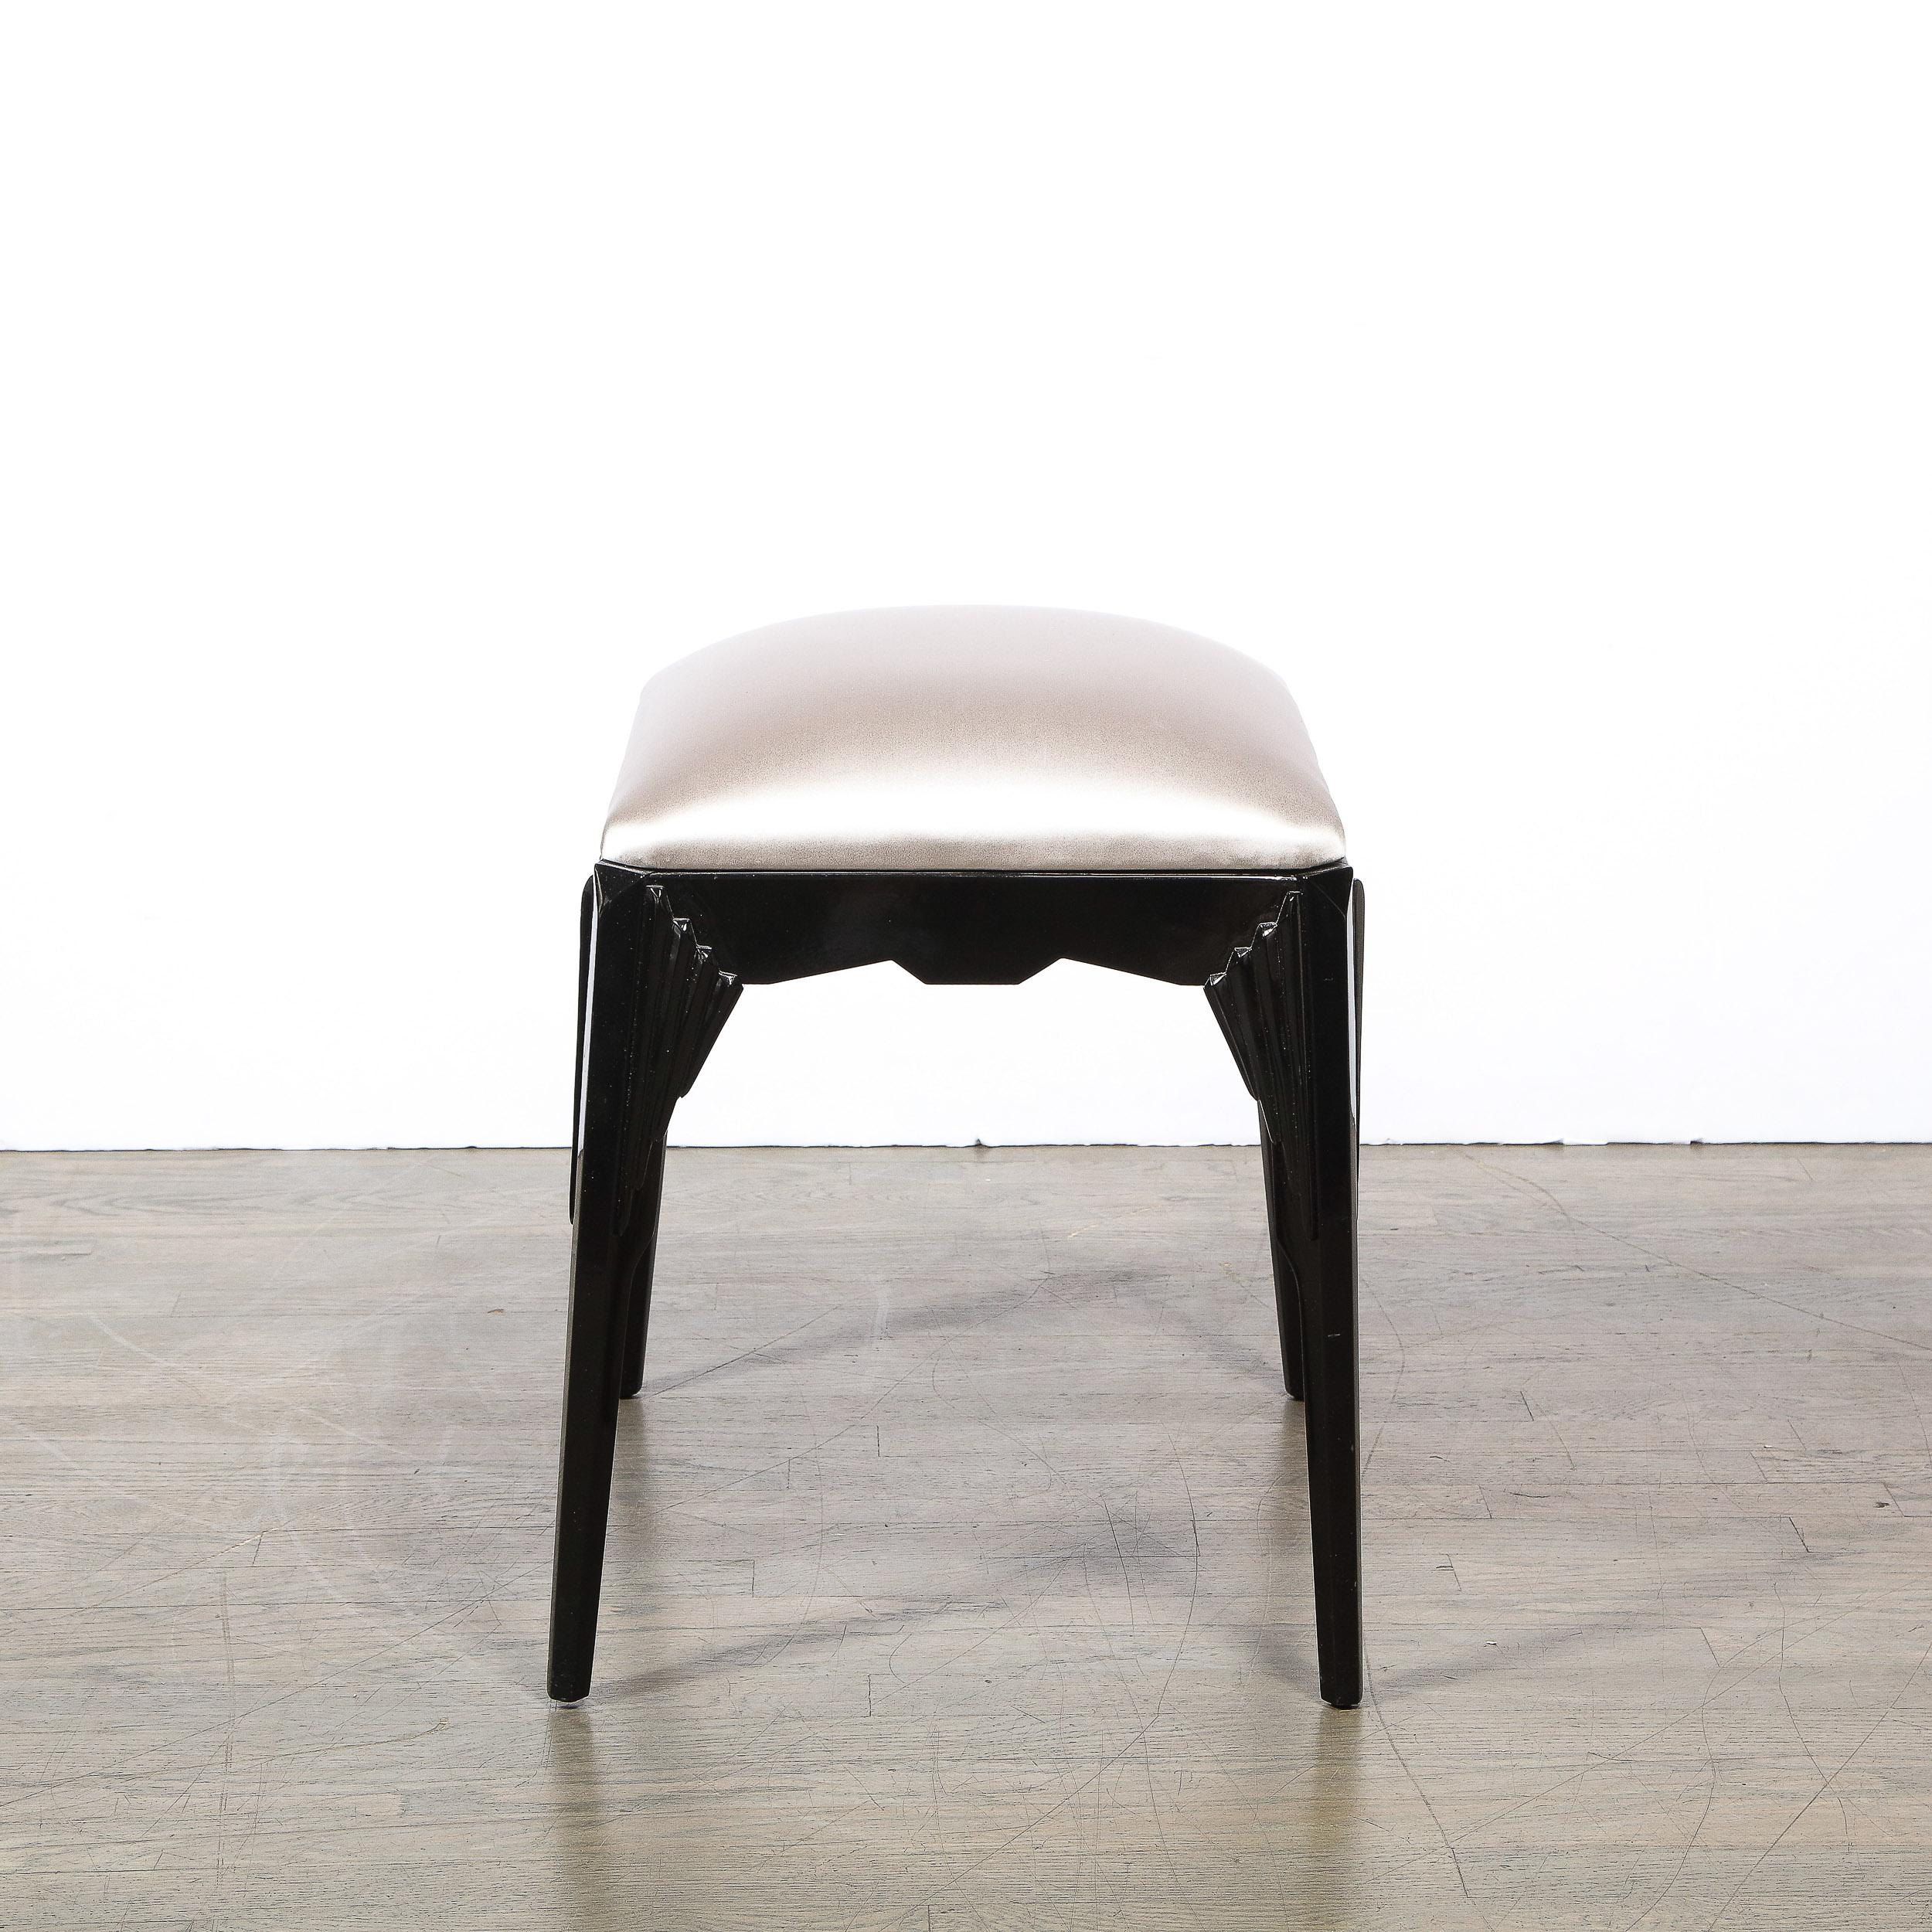  Art Deco Skyscraper Style Black Lacquer Stool in White Gold Silk  In Excellent Condition For Sale In New York, NY